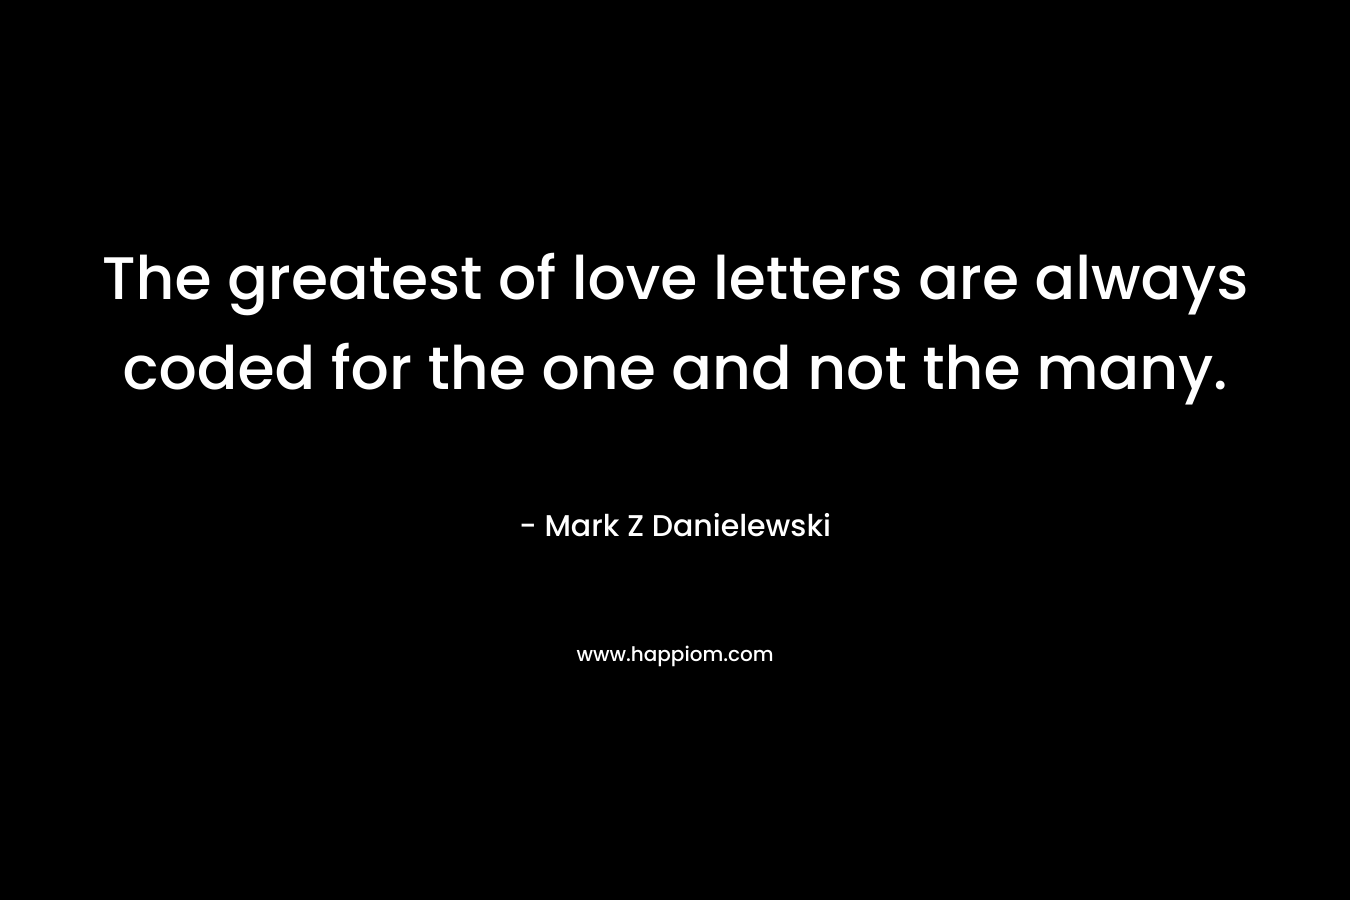 The greatest of love letters are always coded for the one and not the many. – Mark Z Danielewski